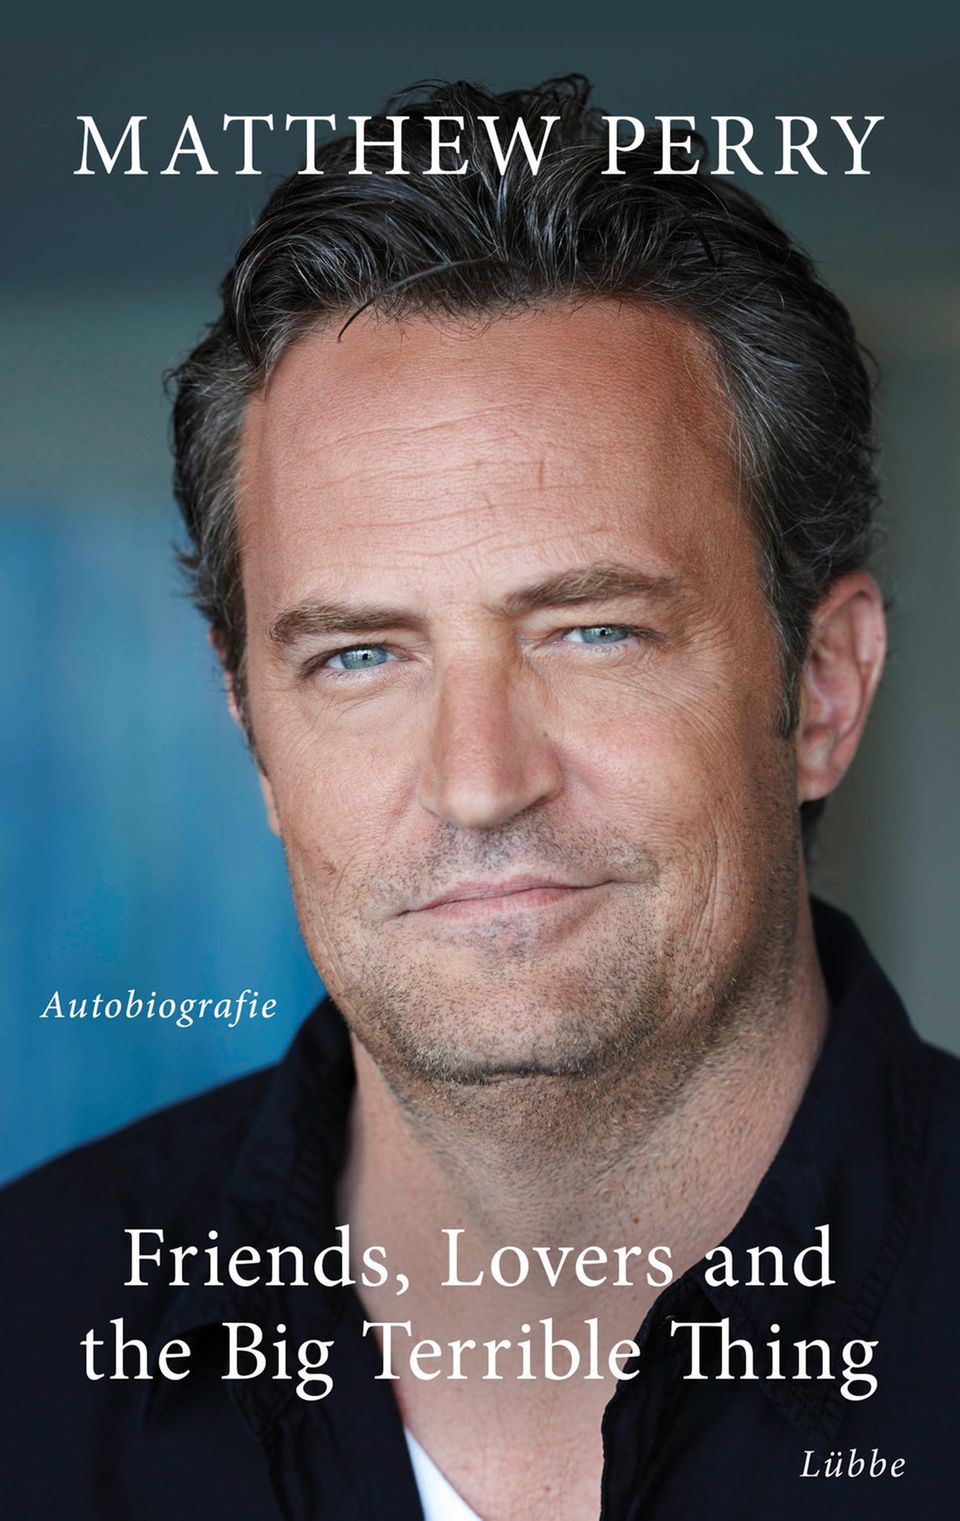 Matthew Perry's autobiography "Friends, Lovers and the Big Terrible Thing" (Bastei Lübbe Verlag) will be available in stores from November 1st.